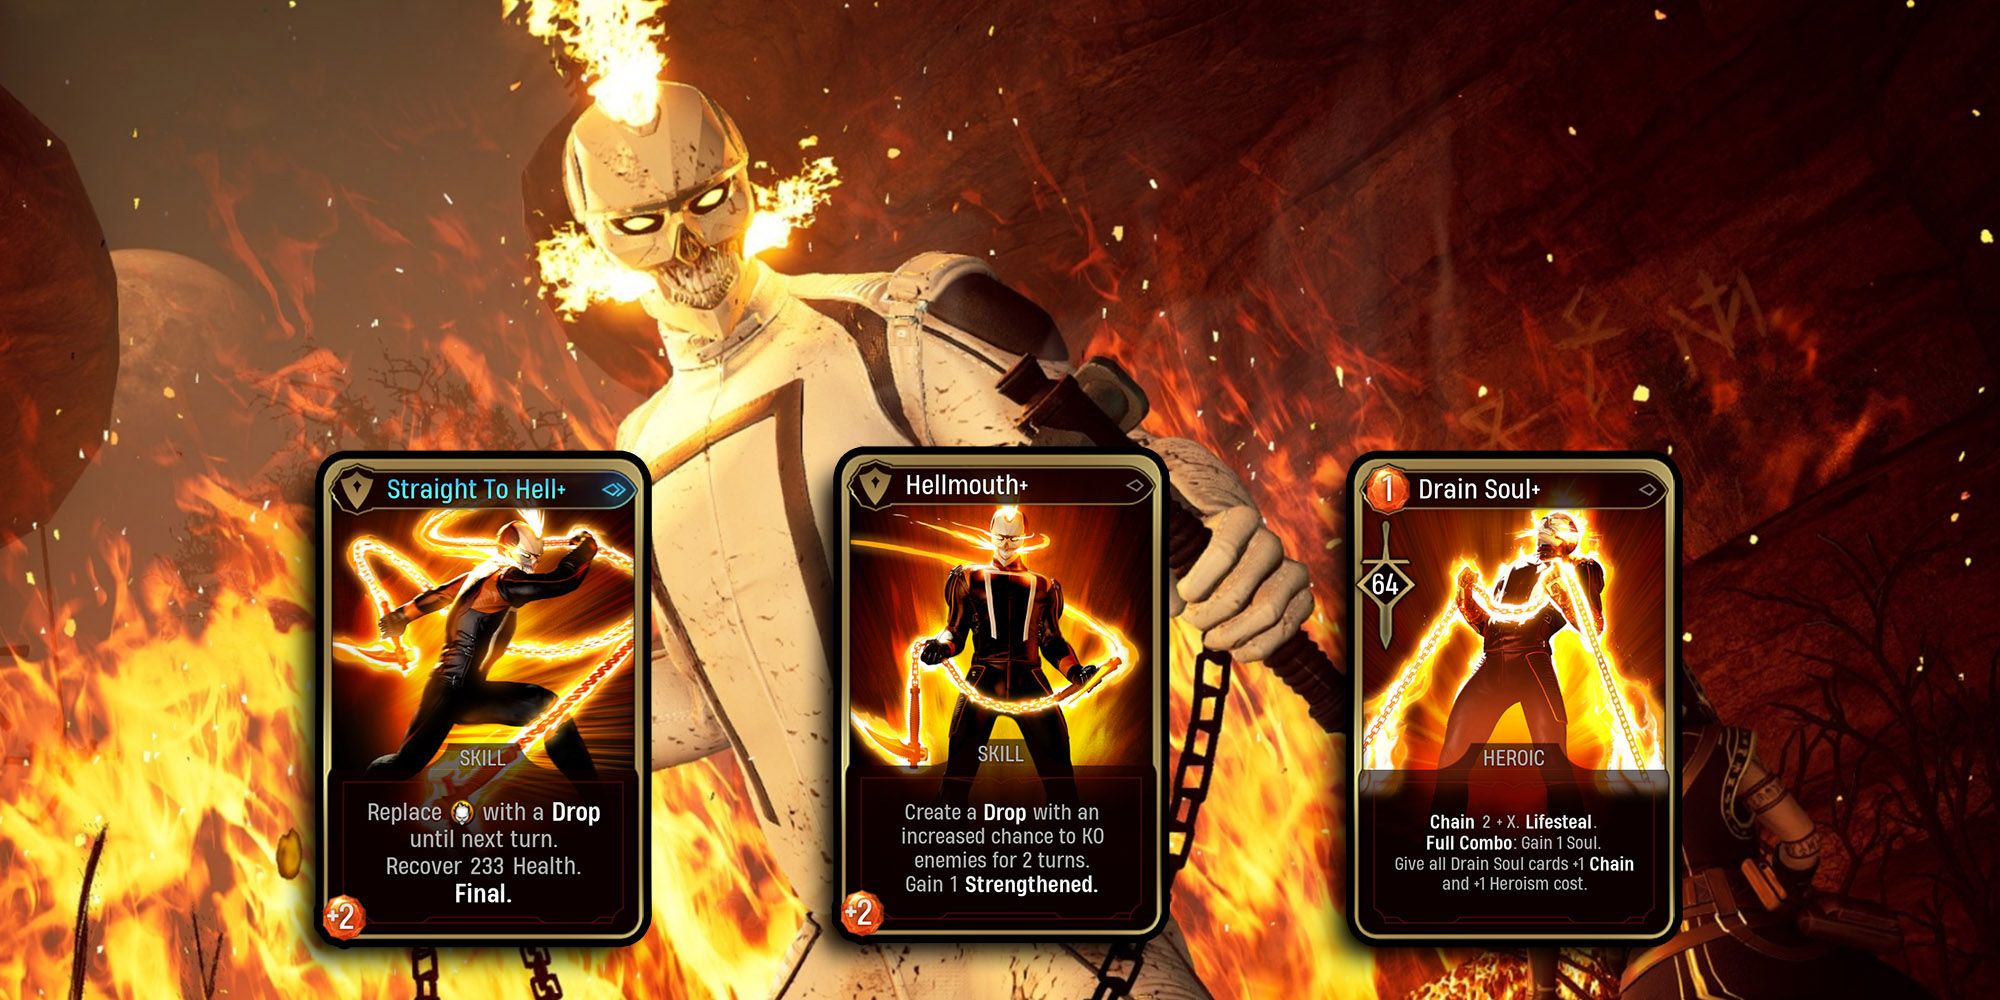 Marvel Midnight Suns - Ghost Rider's Best Card Upgrades Over Image Of Ghost Rider Standing In Fire In-Game